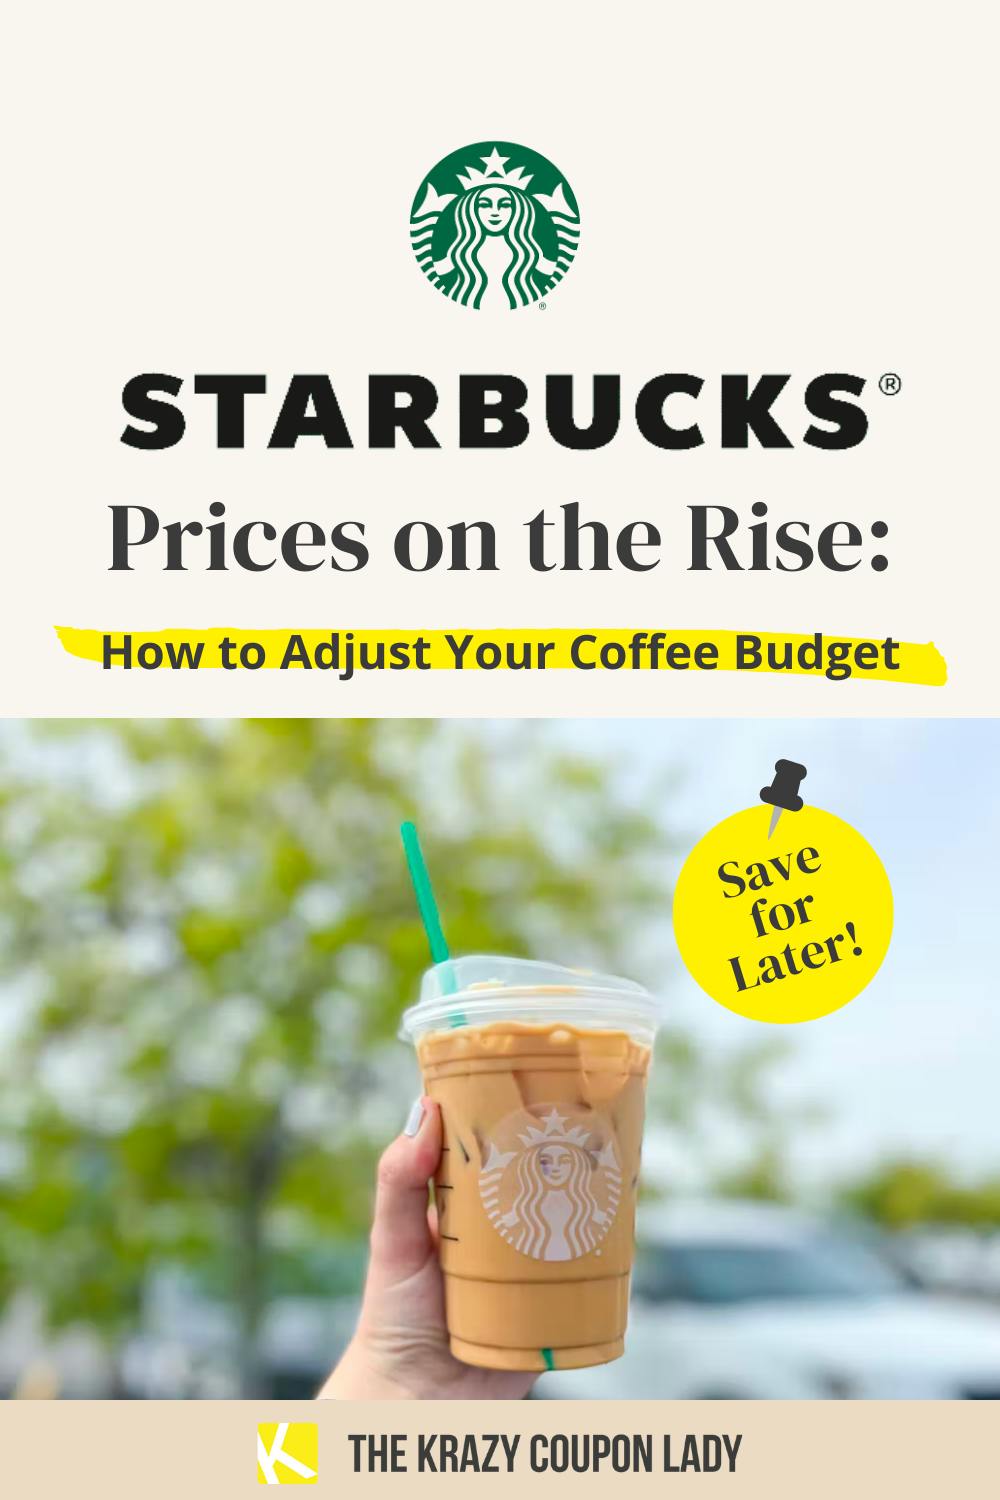 Every Item Affected by the Starbucks Price Increase